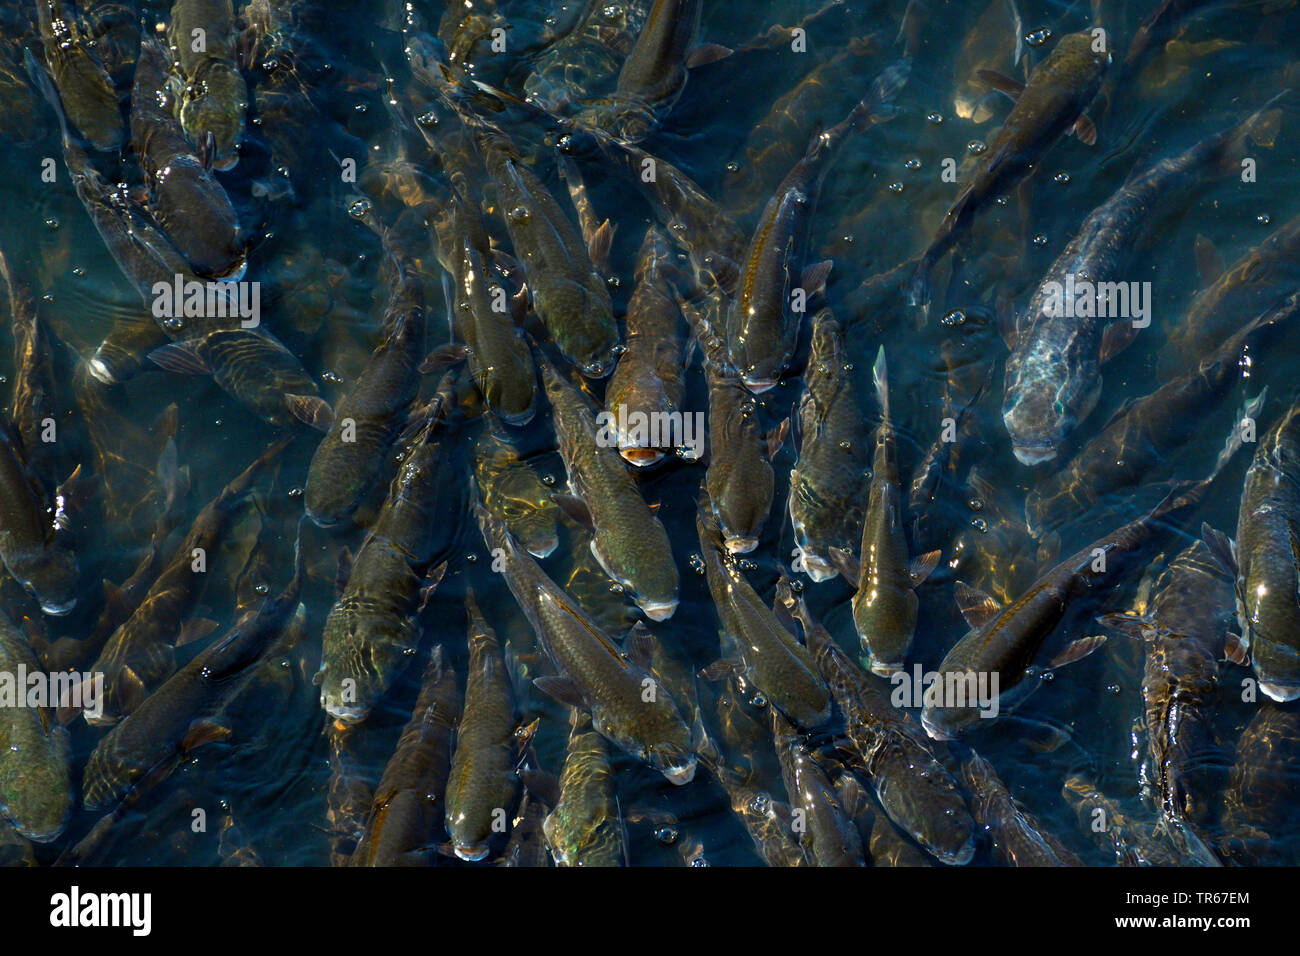 thousands of fish gasping for air, Portugal, Porto Stock Photo